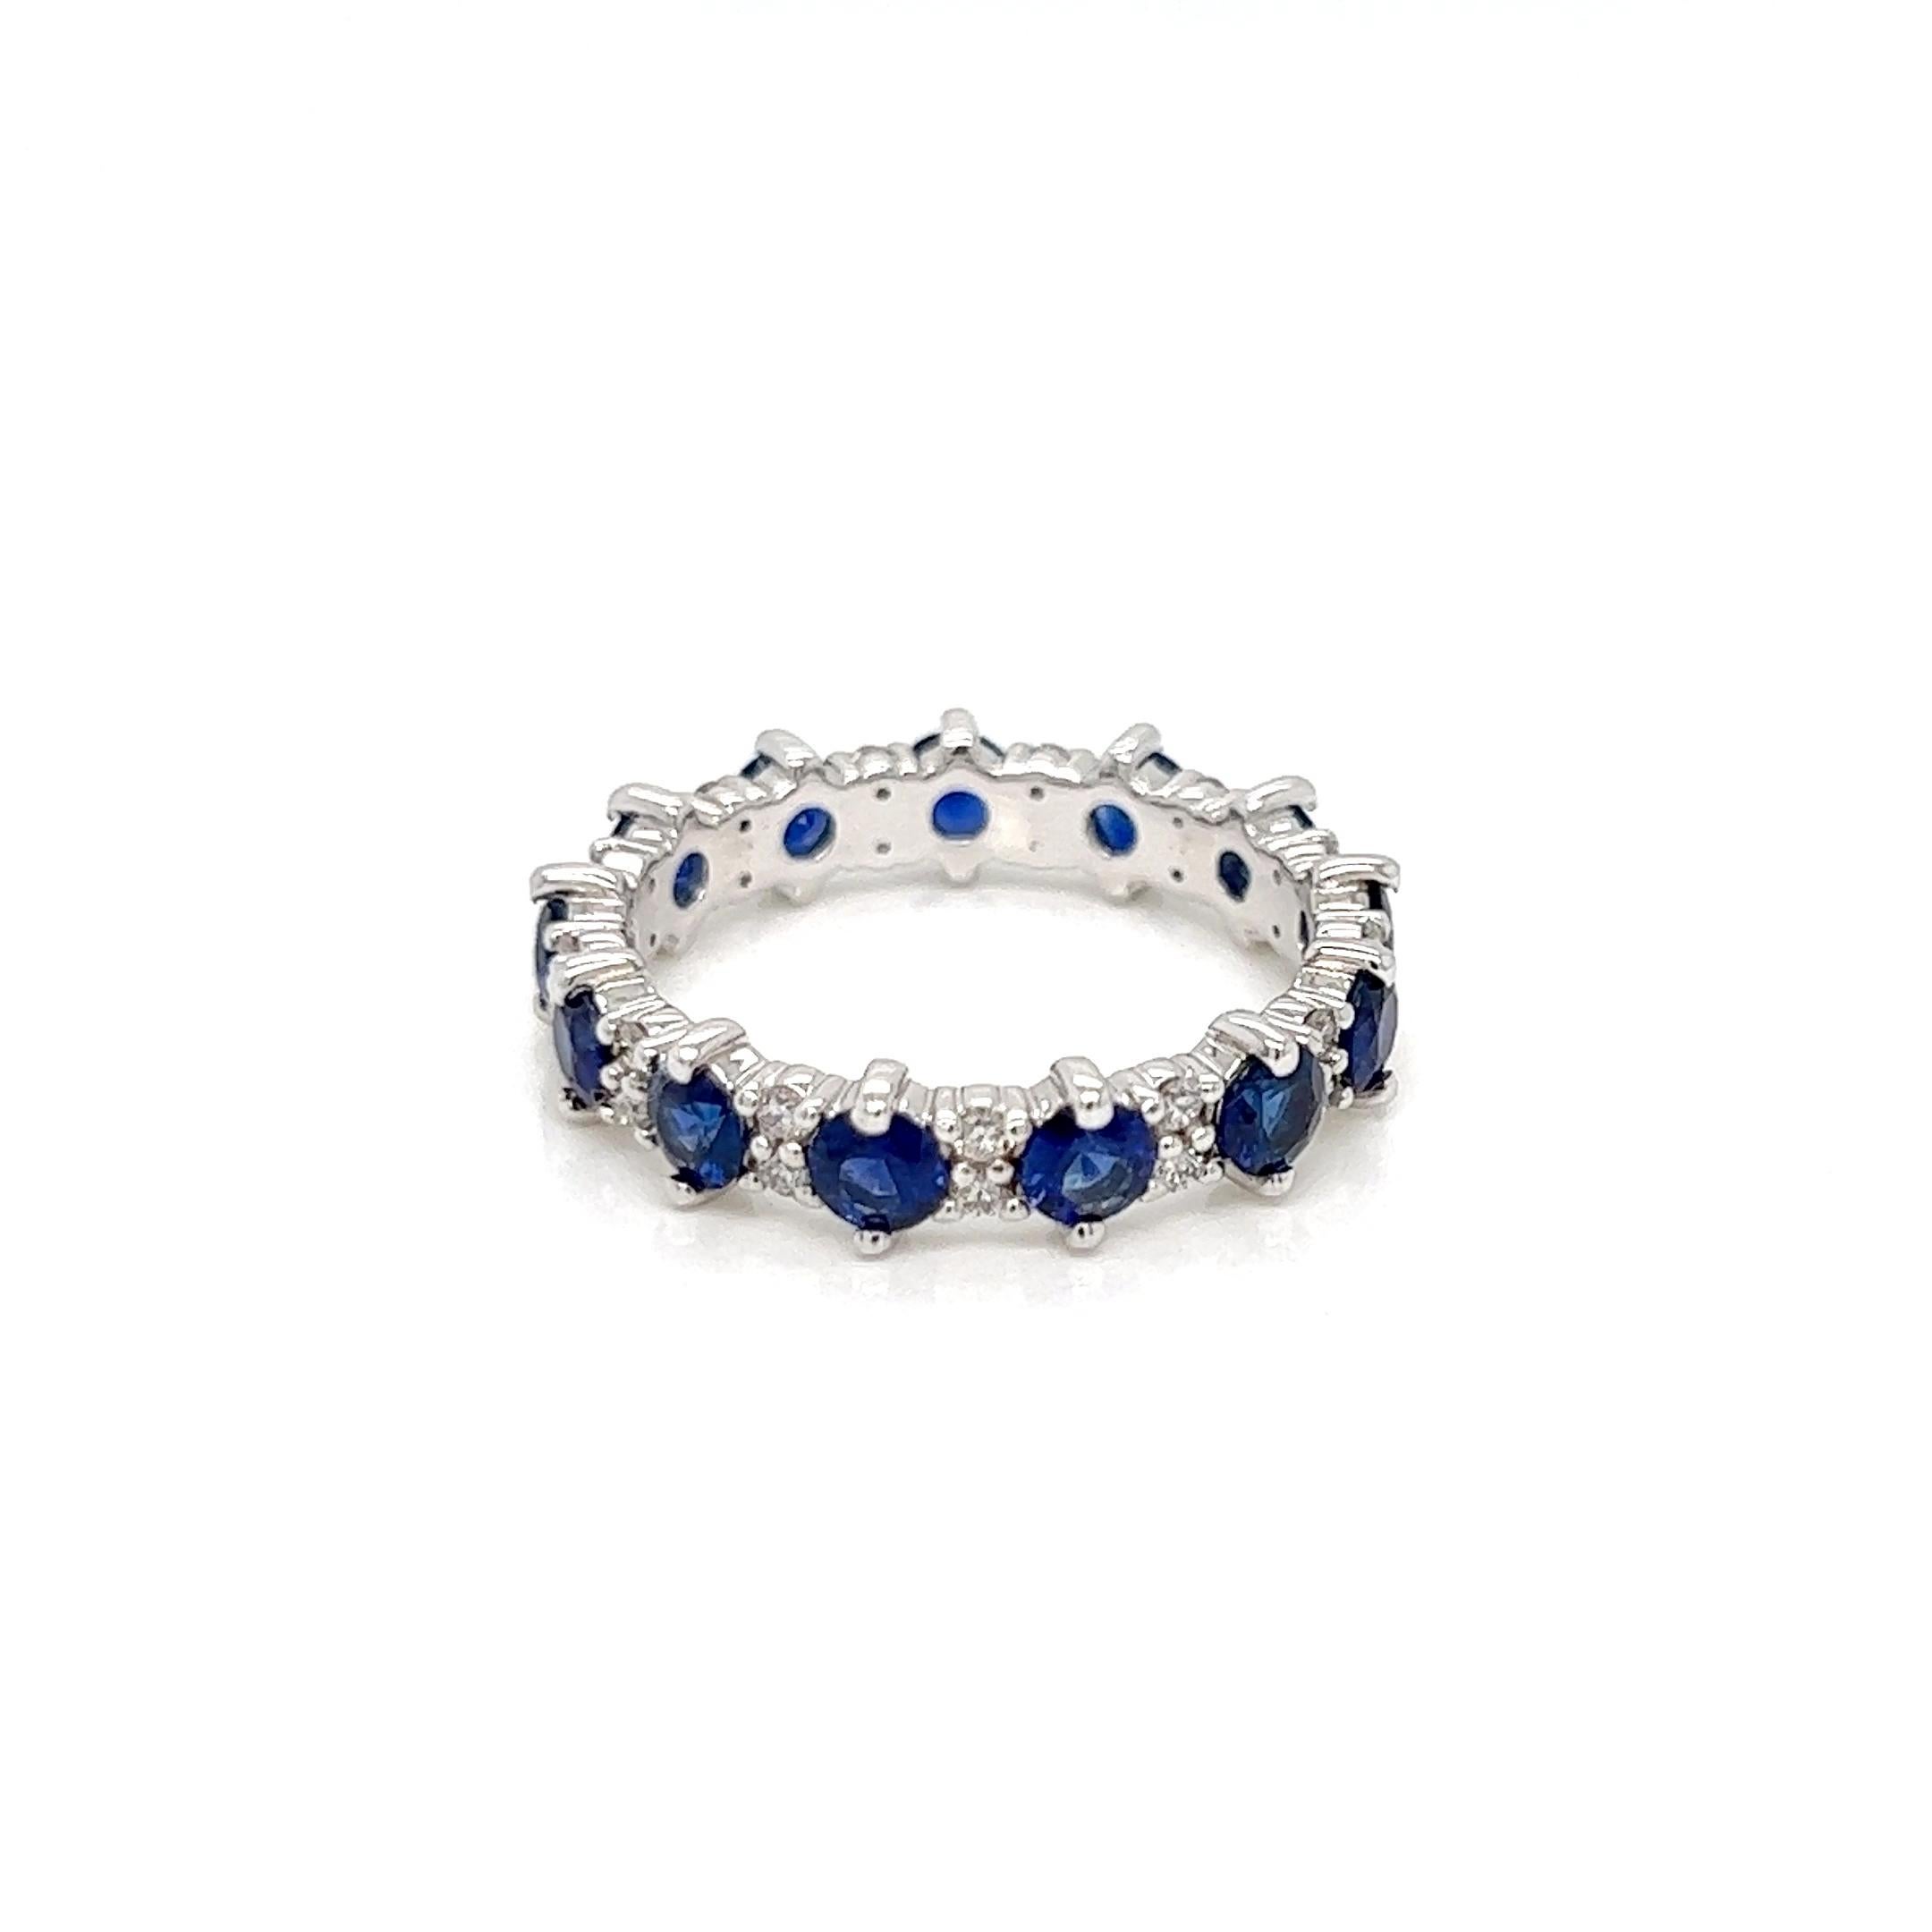 Modern 2.37 Carats Sapphire Diamond Eternity Band Ring in 18k White Gold For Sale